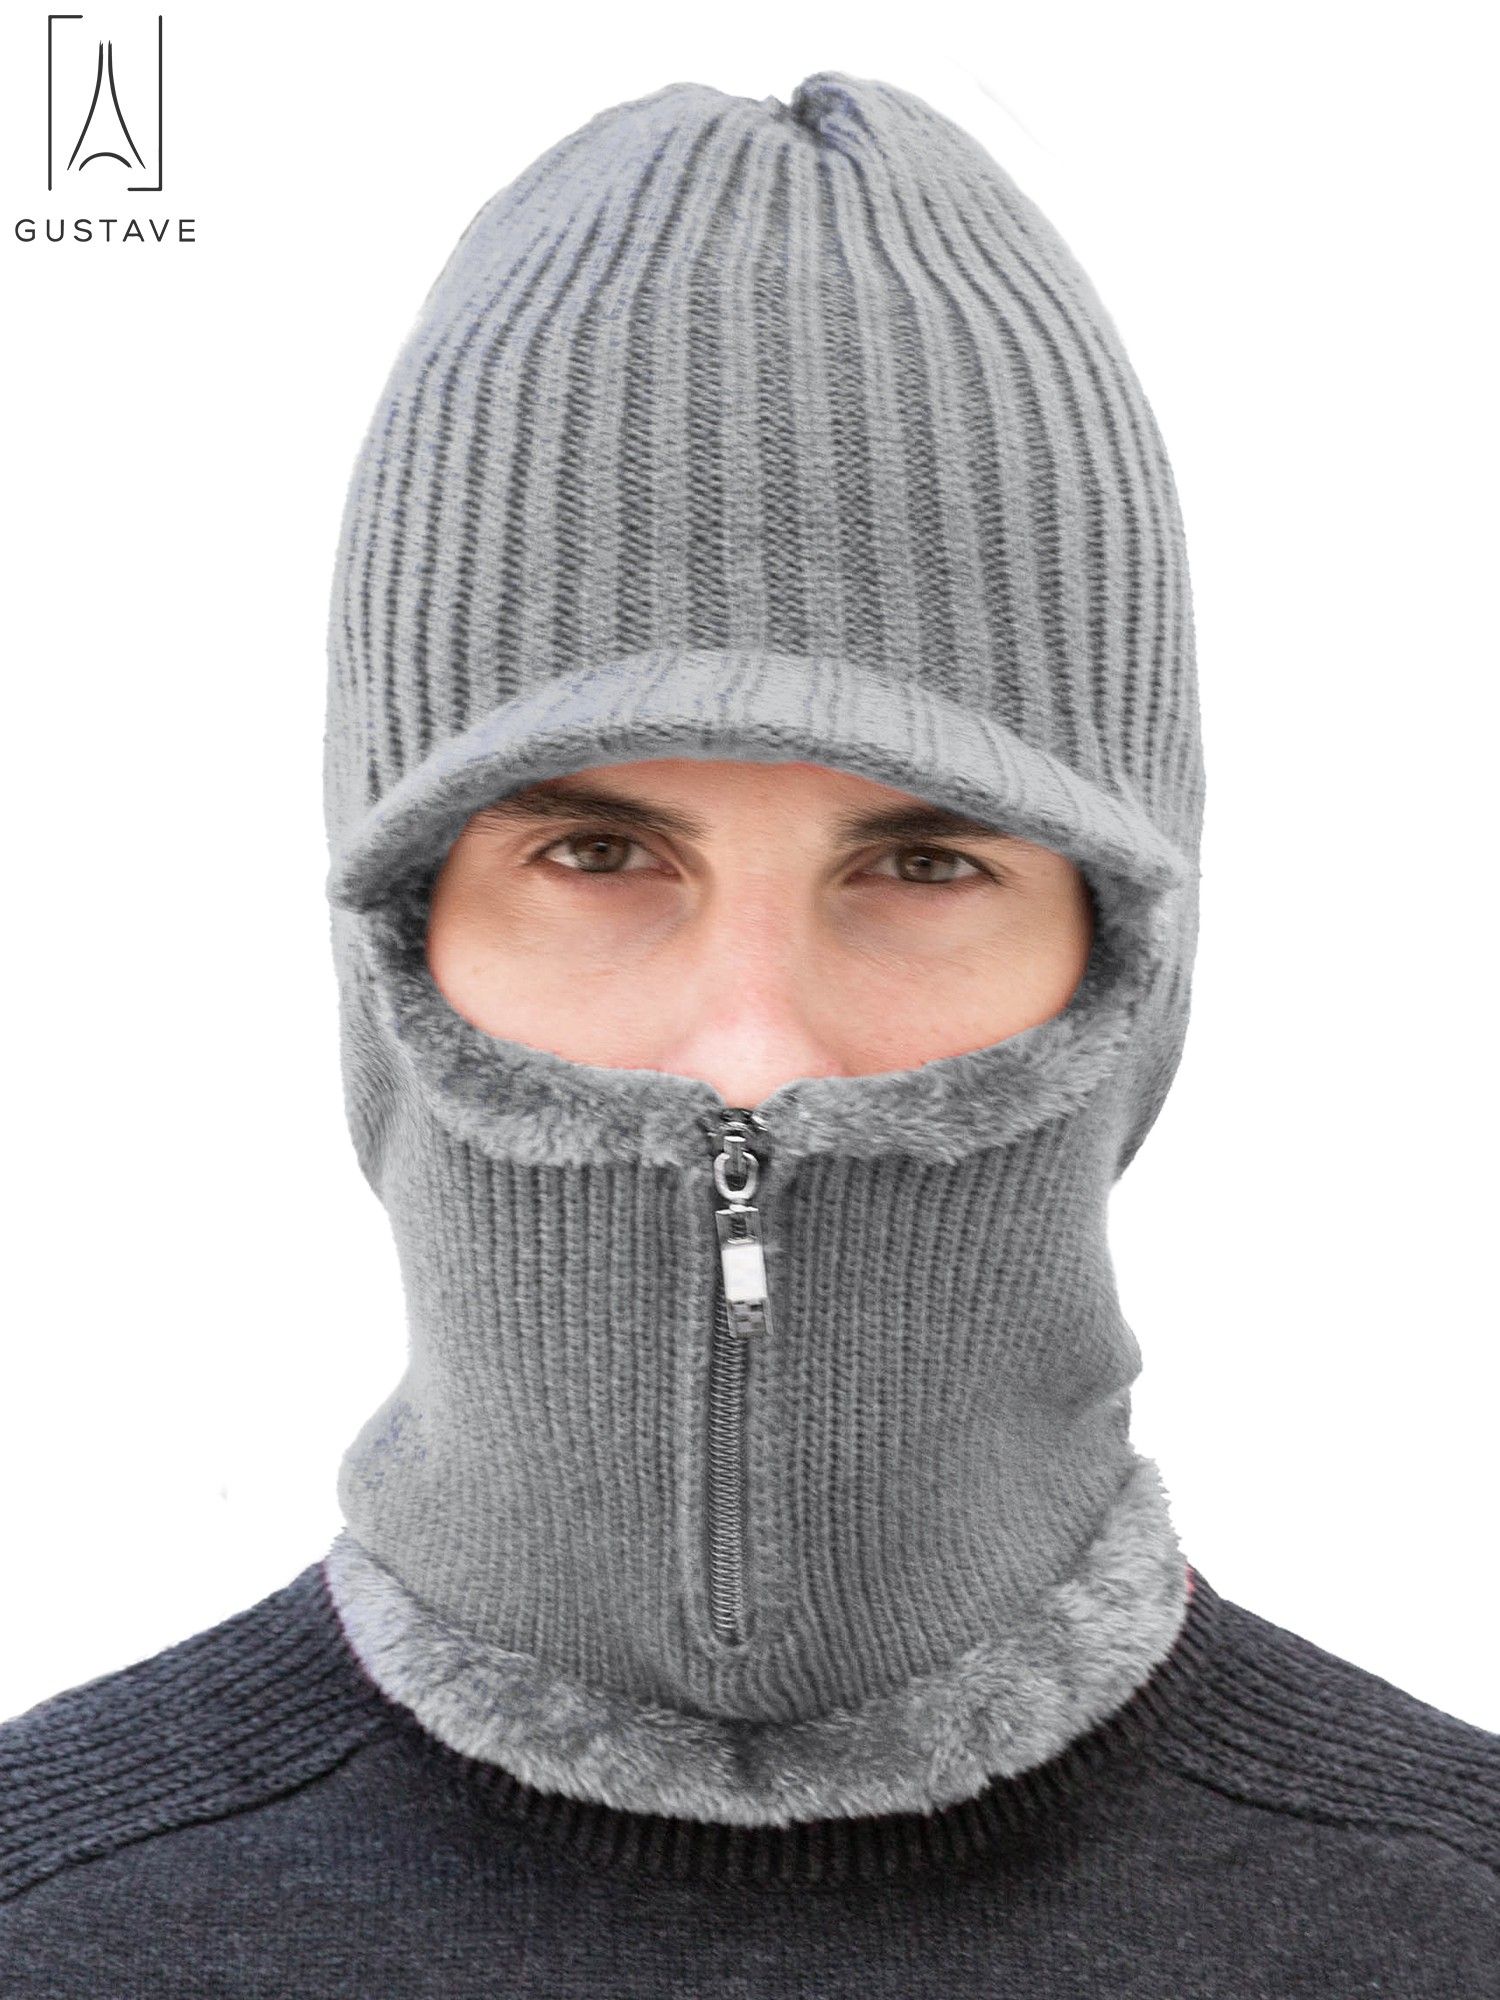 Gustave 2 In 1 Men Winter Warm Balaclava Beanie Hat with Fleece Lining Zipper Neck Scarf Warmer Ear Protector Knitting Stripes Hat and Scarf Conjoined Set "Gray" - image 3 of 9